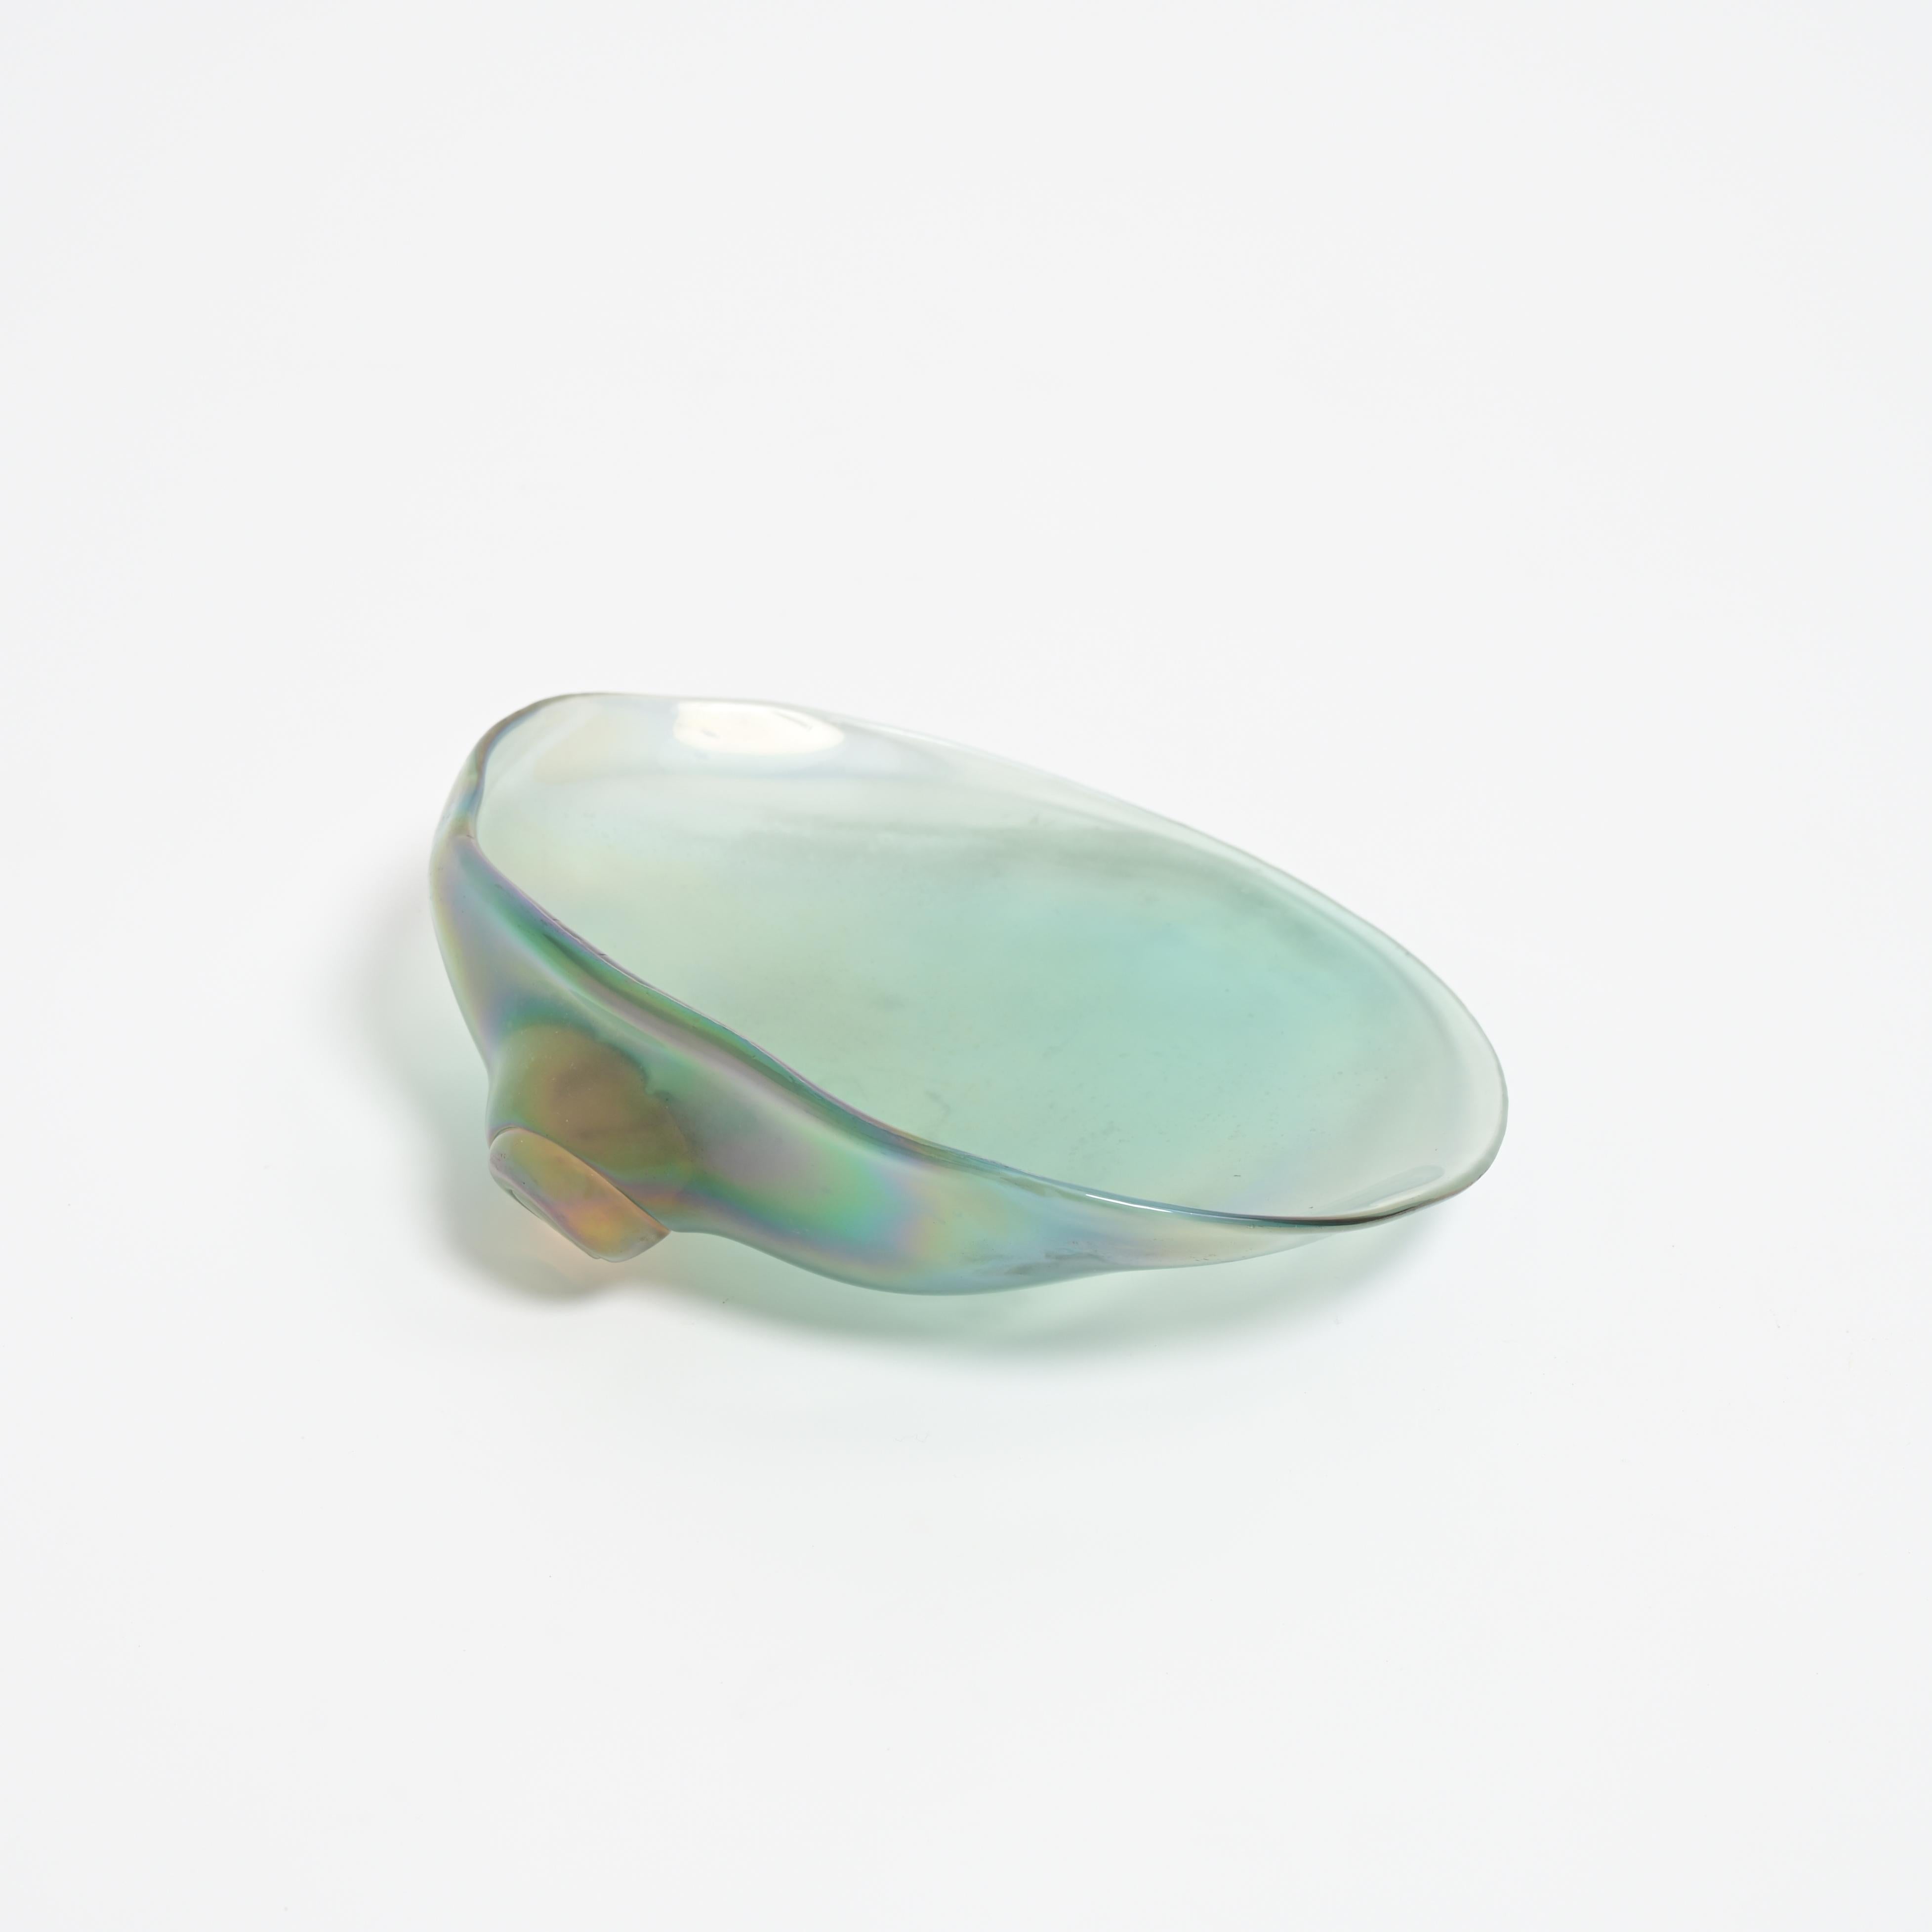 Glass shell with strongly iridescent surface designed by Carlo Scarpa in the 40ties. Acid signature Venini Murano Italy. Designed between 1942 and 1947 and produced before 1960.
